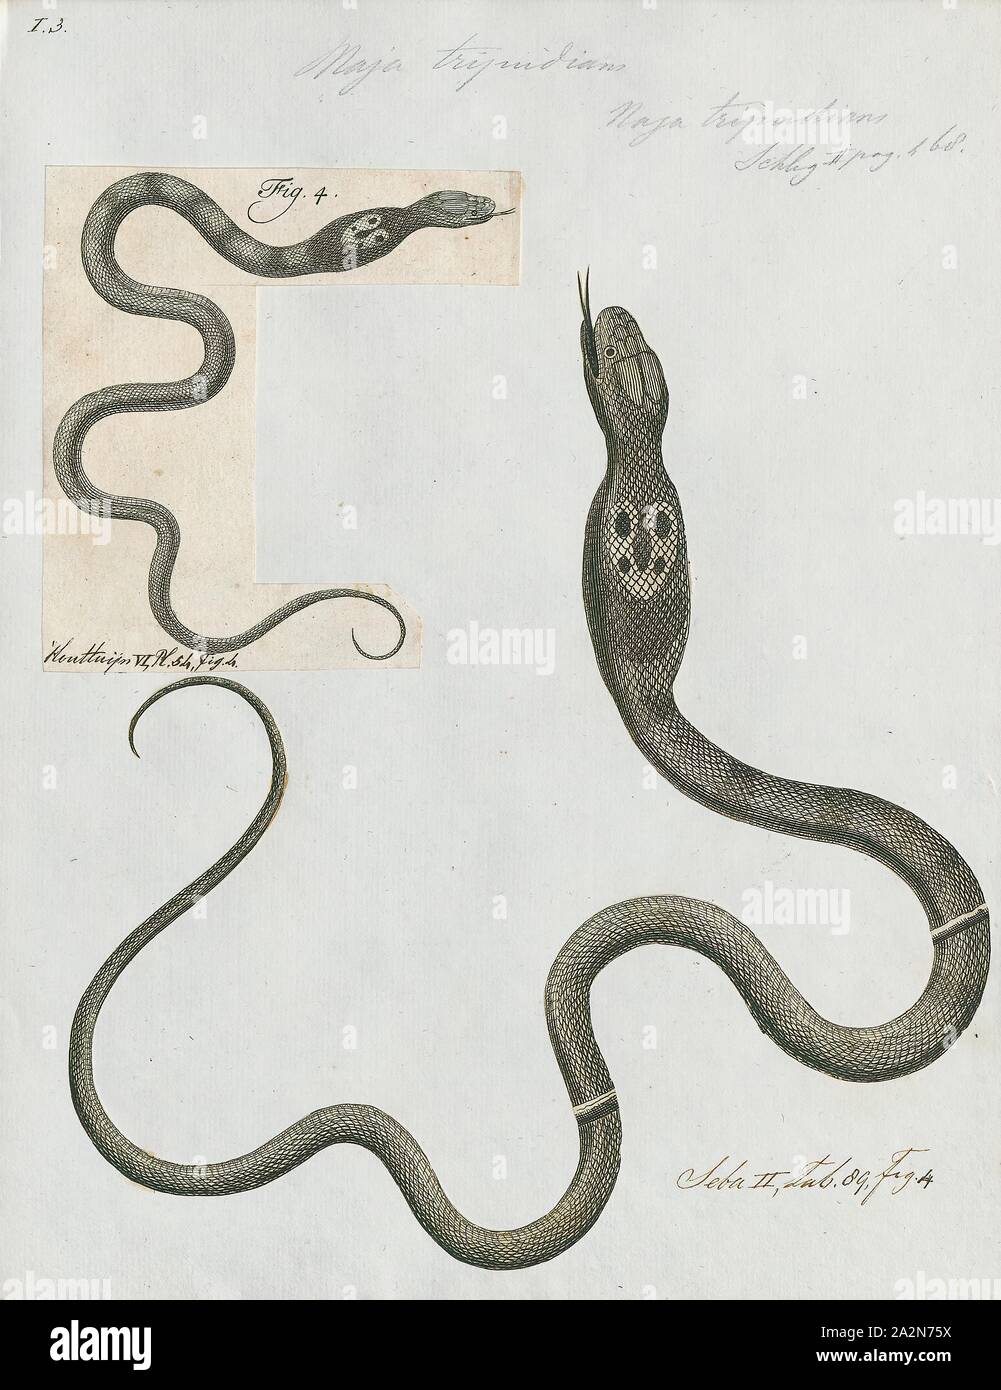 Naja tripudians, Print, Naja is a genus of venomous elapid snakes known as  cobras. Several other genera include species commonly called cobras (for  example the ring-necked spitting cobra and the king cobra)